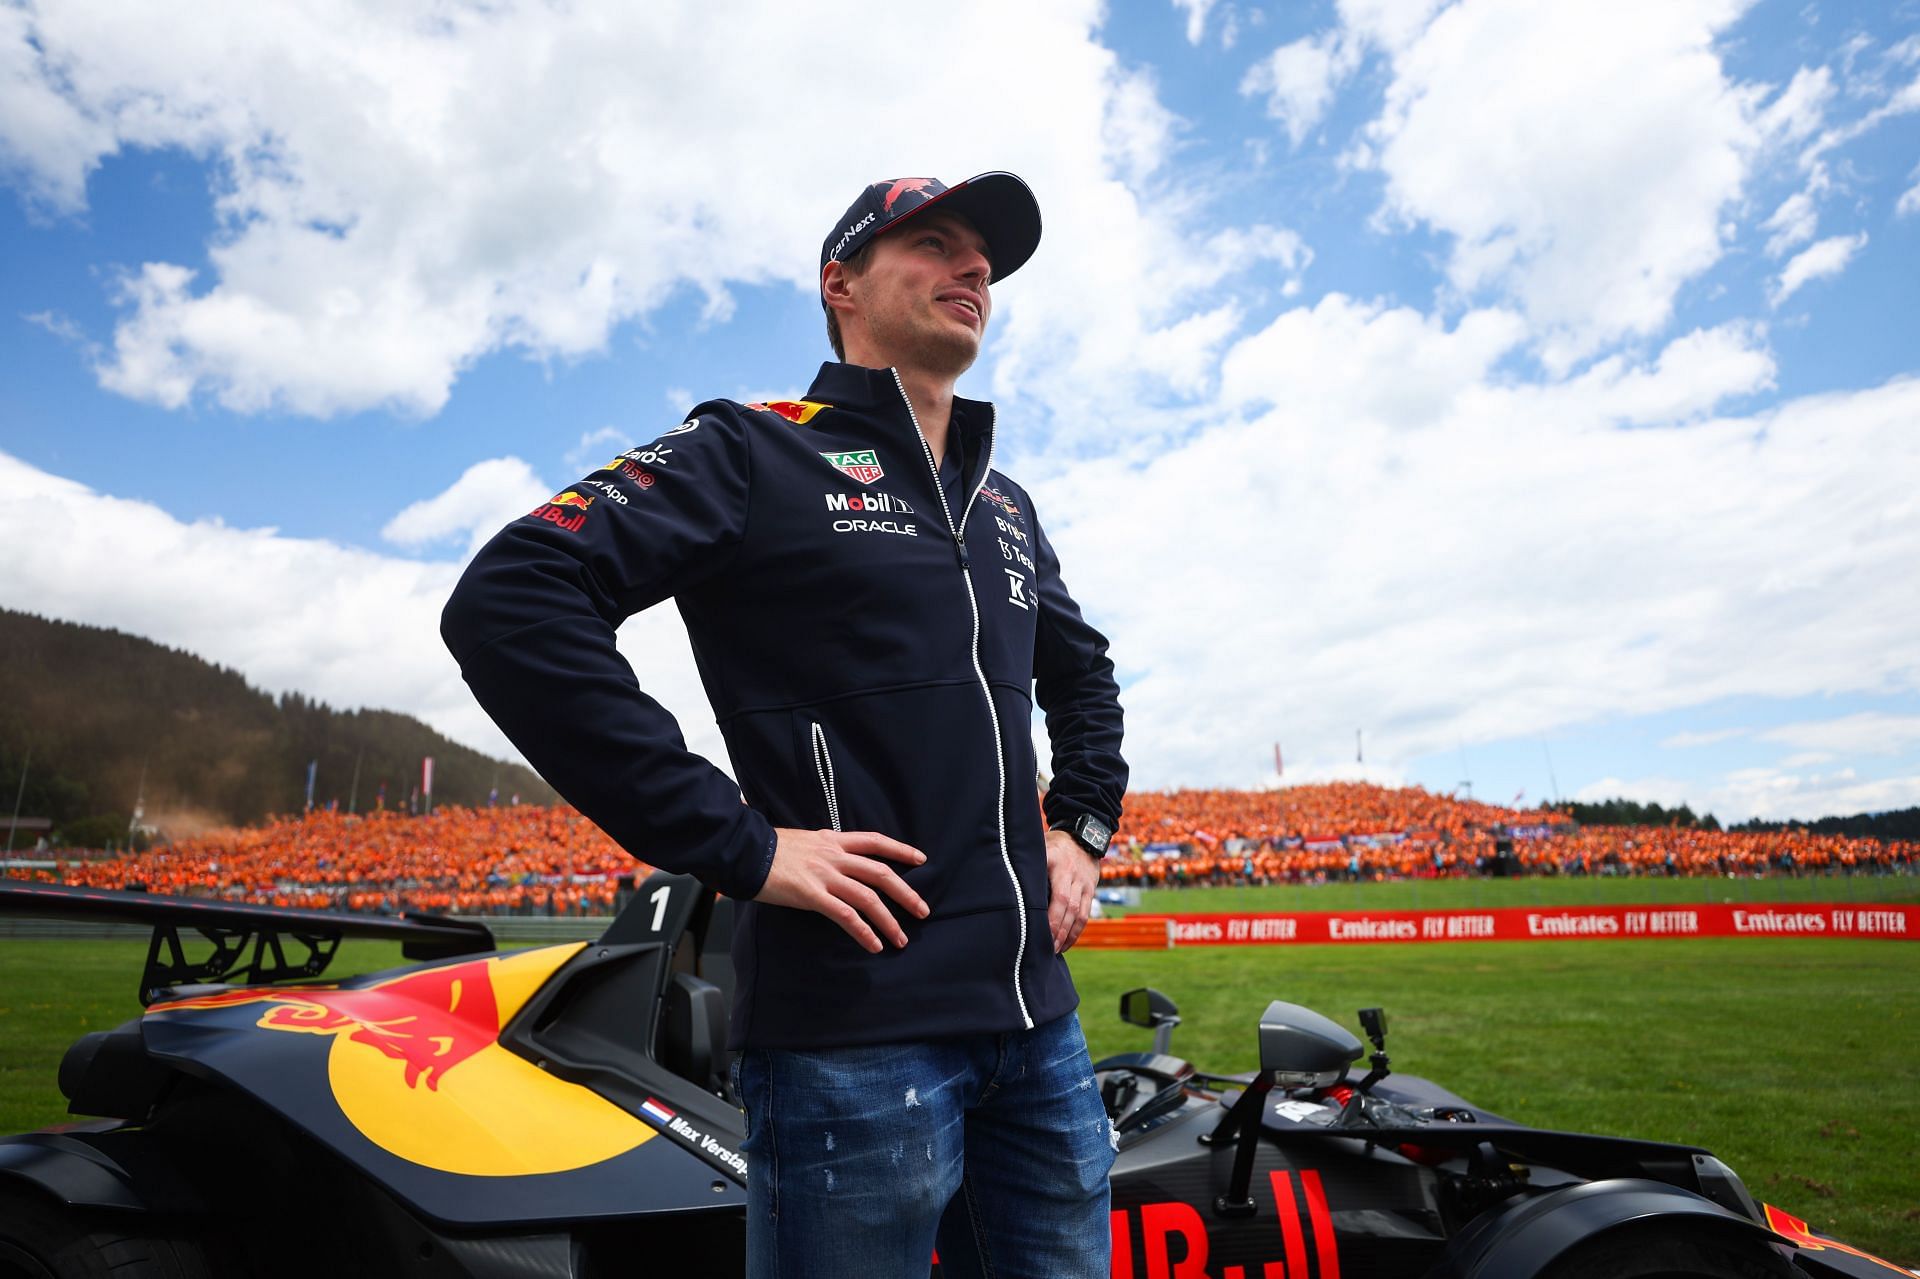 Max Verstappen greets the crowd on the drivers parade ahead of the F1 Grand Prix of Austria at Red Bull Ring on July 10, 2022 in Spielberg, Austria. (Photo by Bryn Lennon/Getty Images)